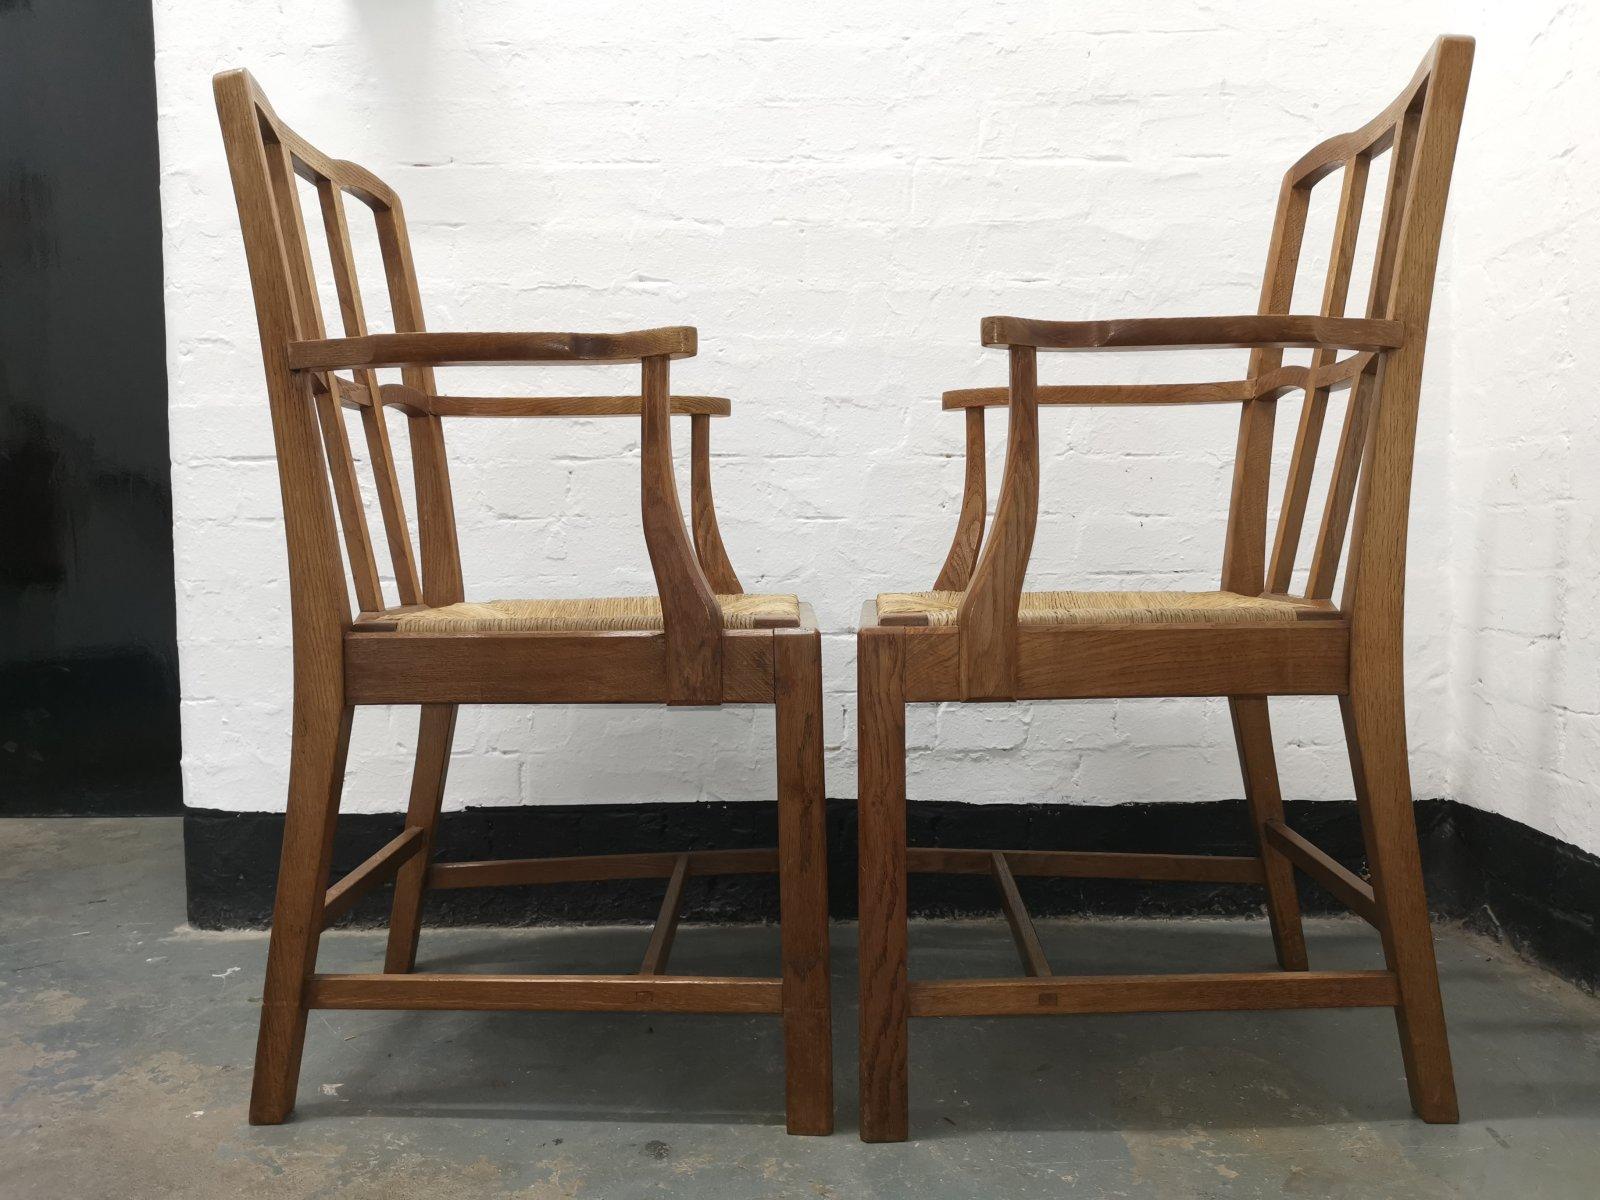 A pair of English Cotswold School Arts & Crafts oak lattice back armchairs with subtle arches to the lattice backs, shaped arms, and pegged construction retaining the original rush seats in great condition.
Good quality sculptural craftsmanship.